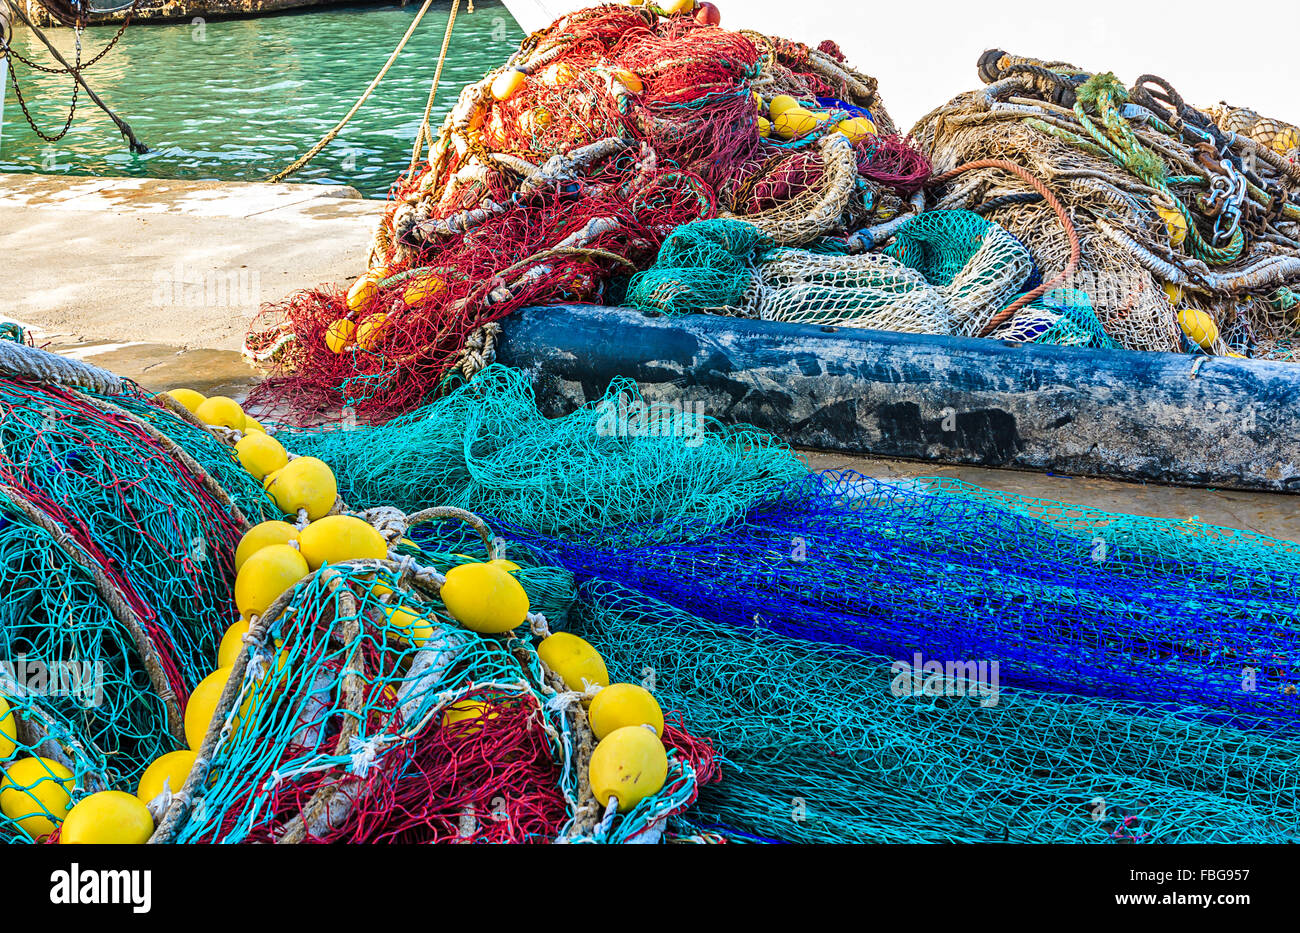 Brightly colored fish nets in a Mediterranean port Stock Photo